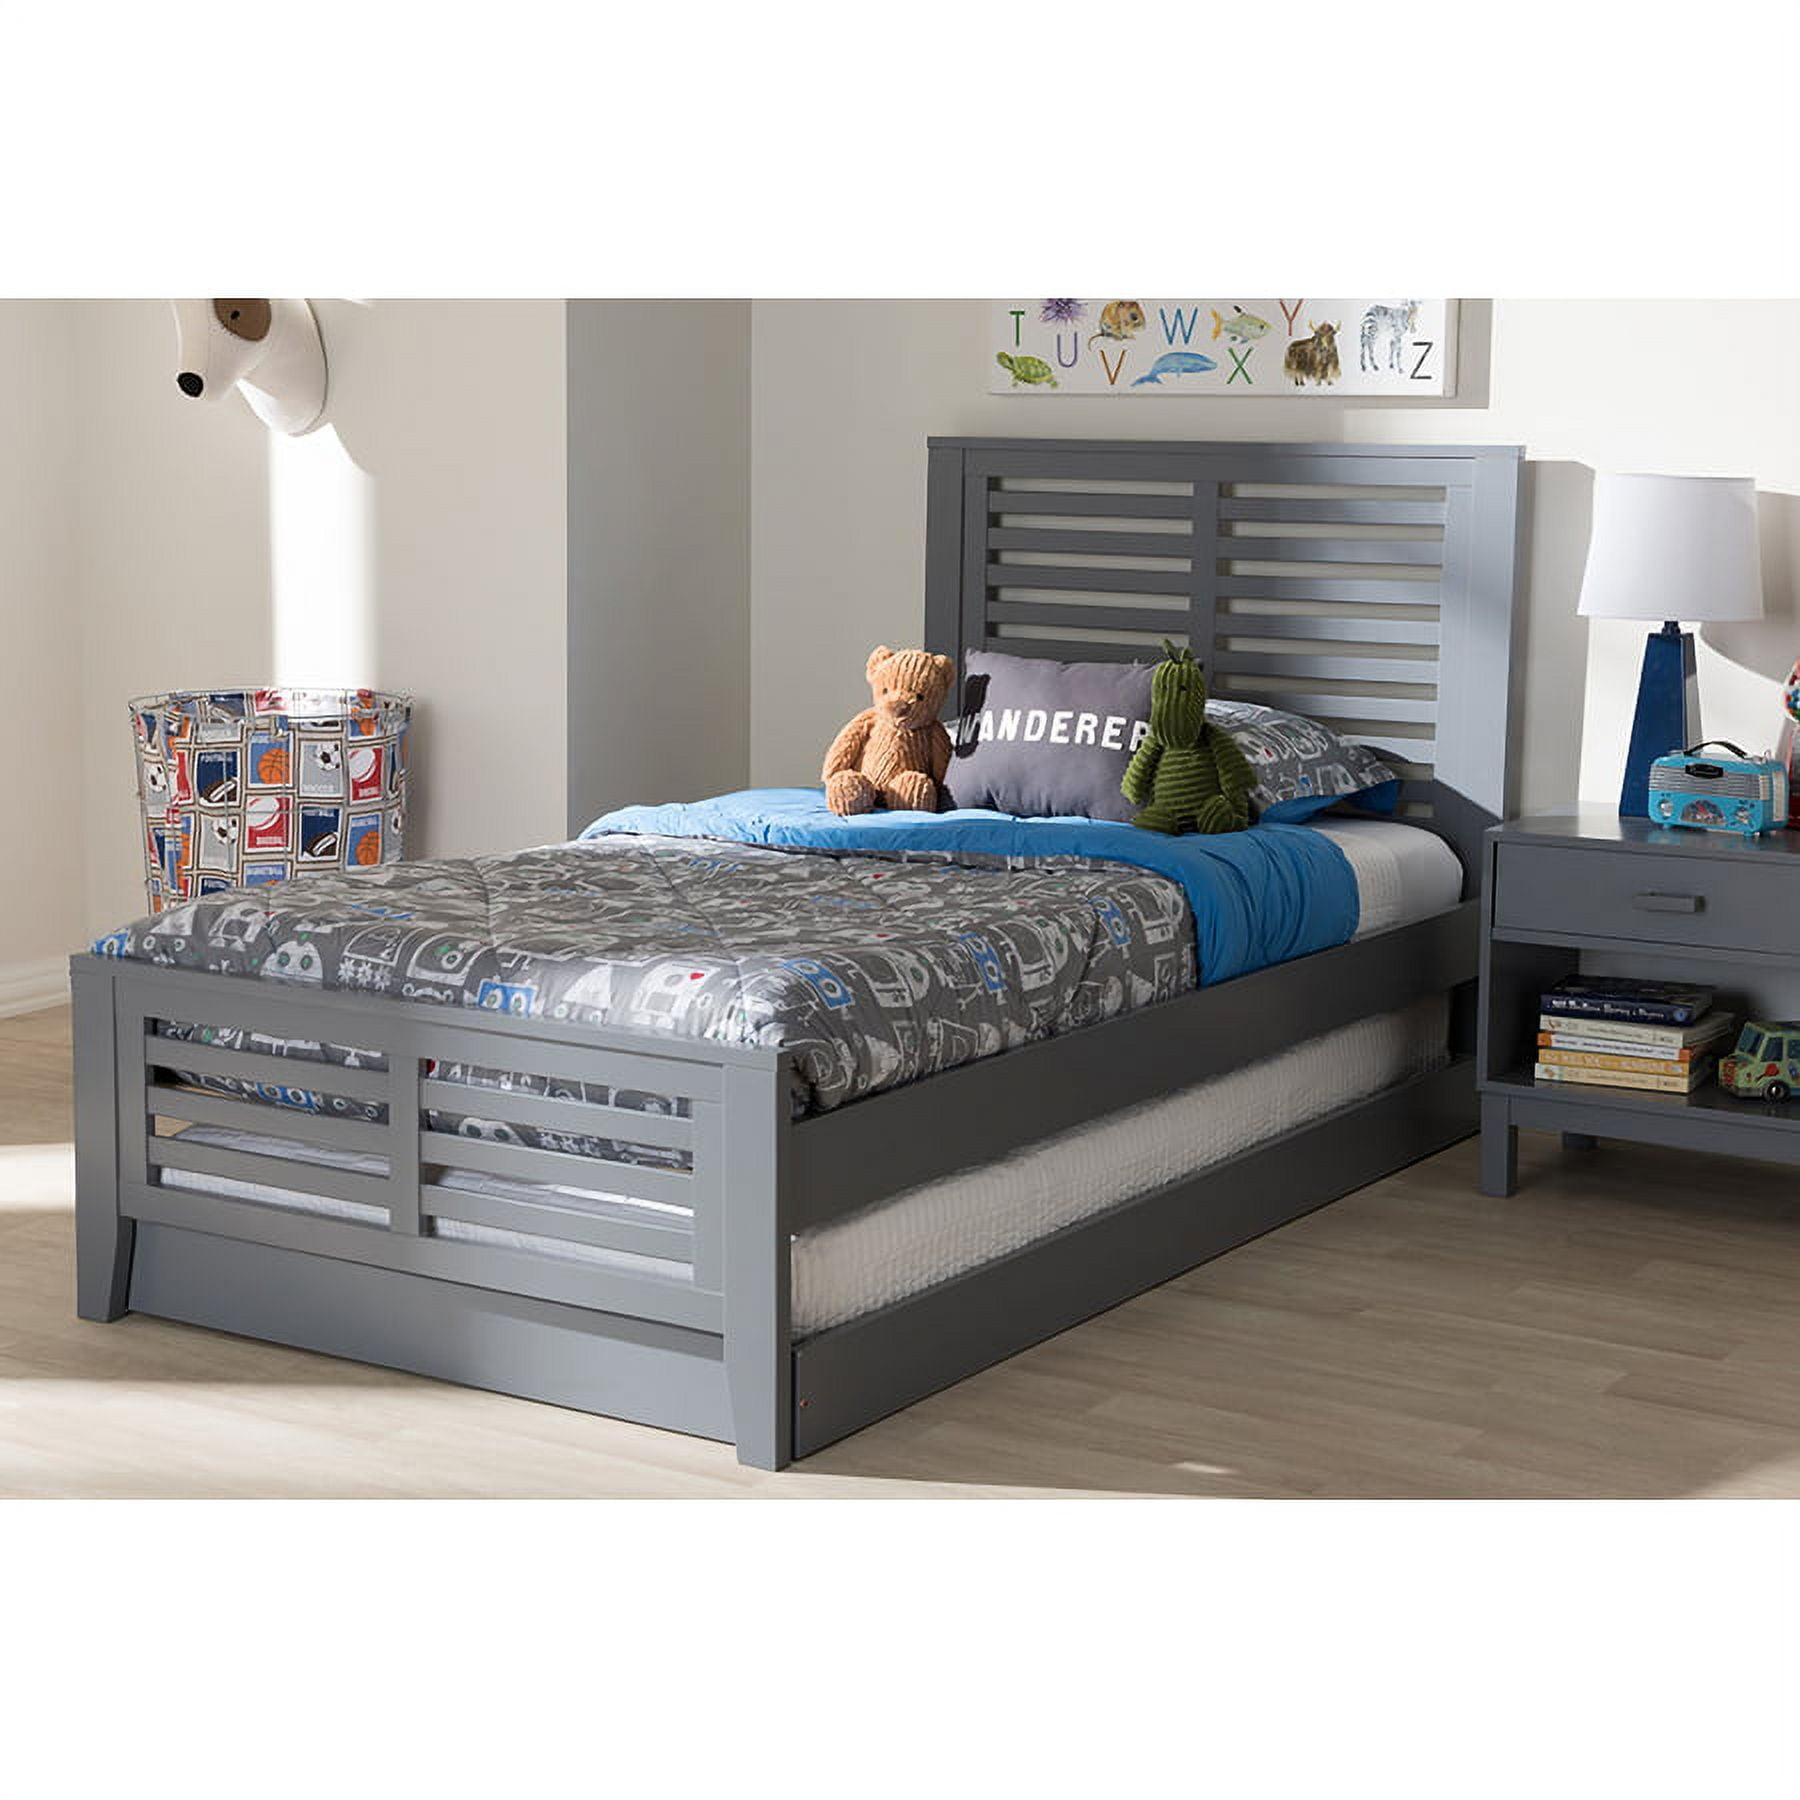 Sedona Modern Mission-Style Twin Platform Bed with Trundle in Brown